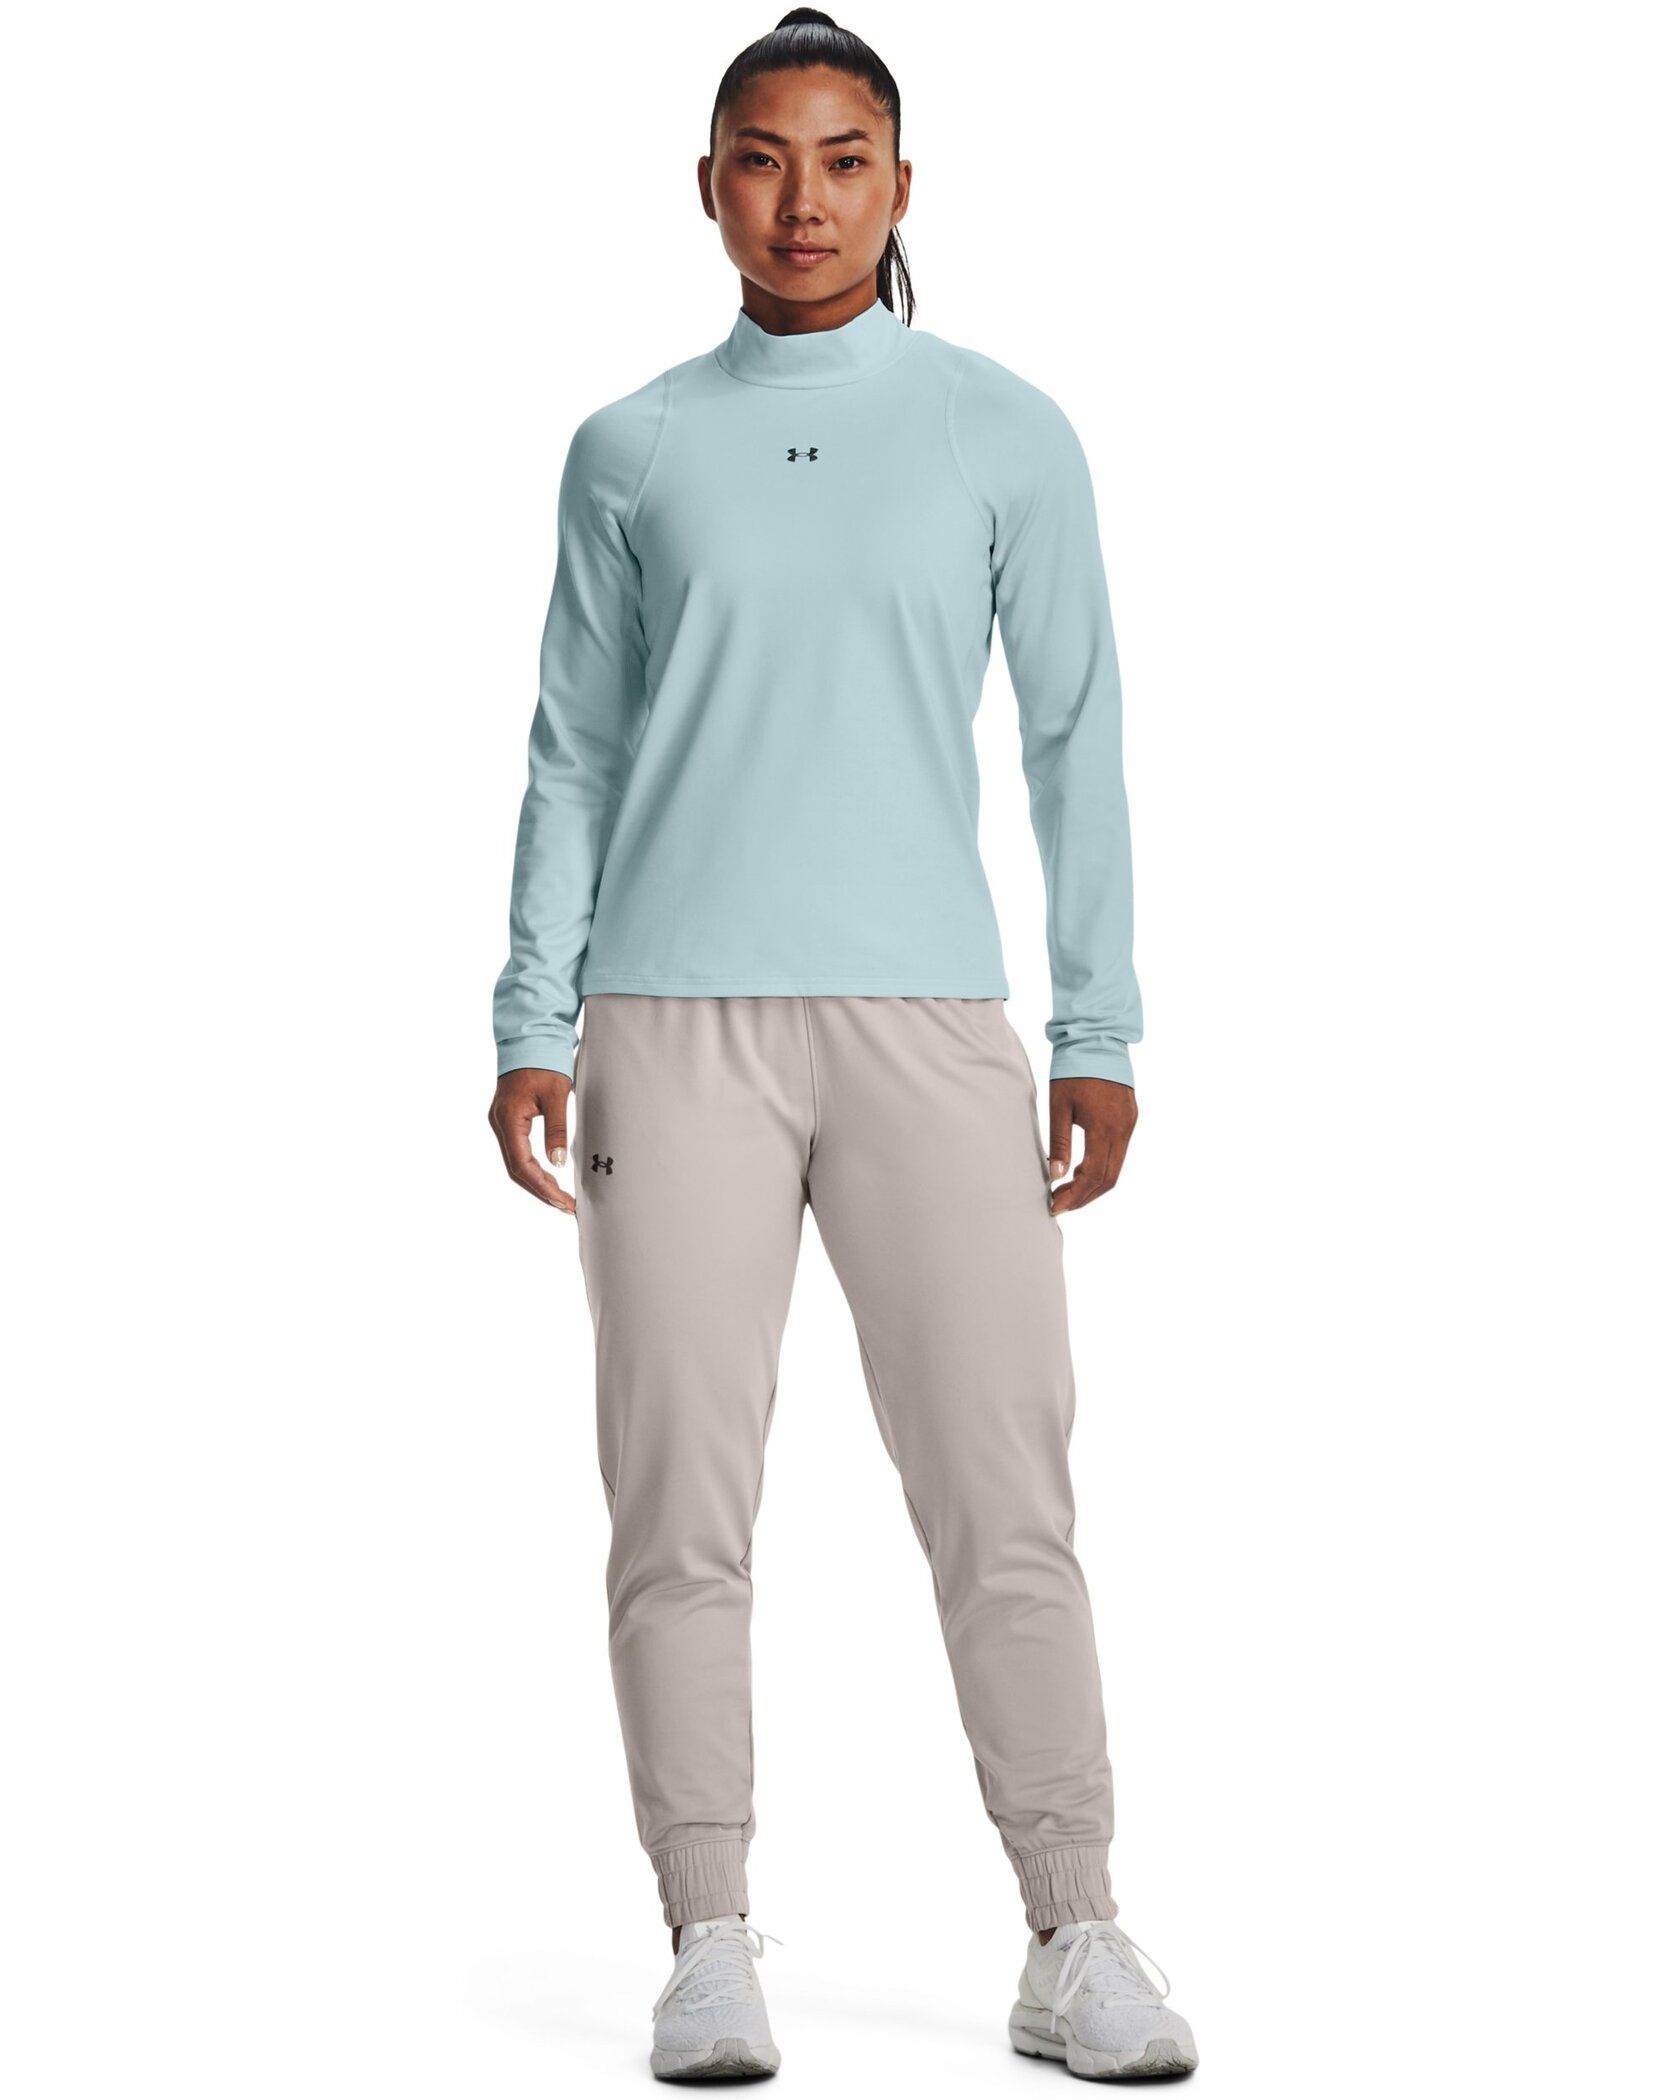 Under Armour Teal Sweatpants Size XL - 45% off